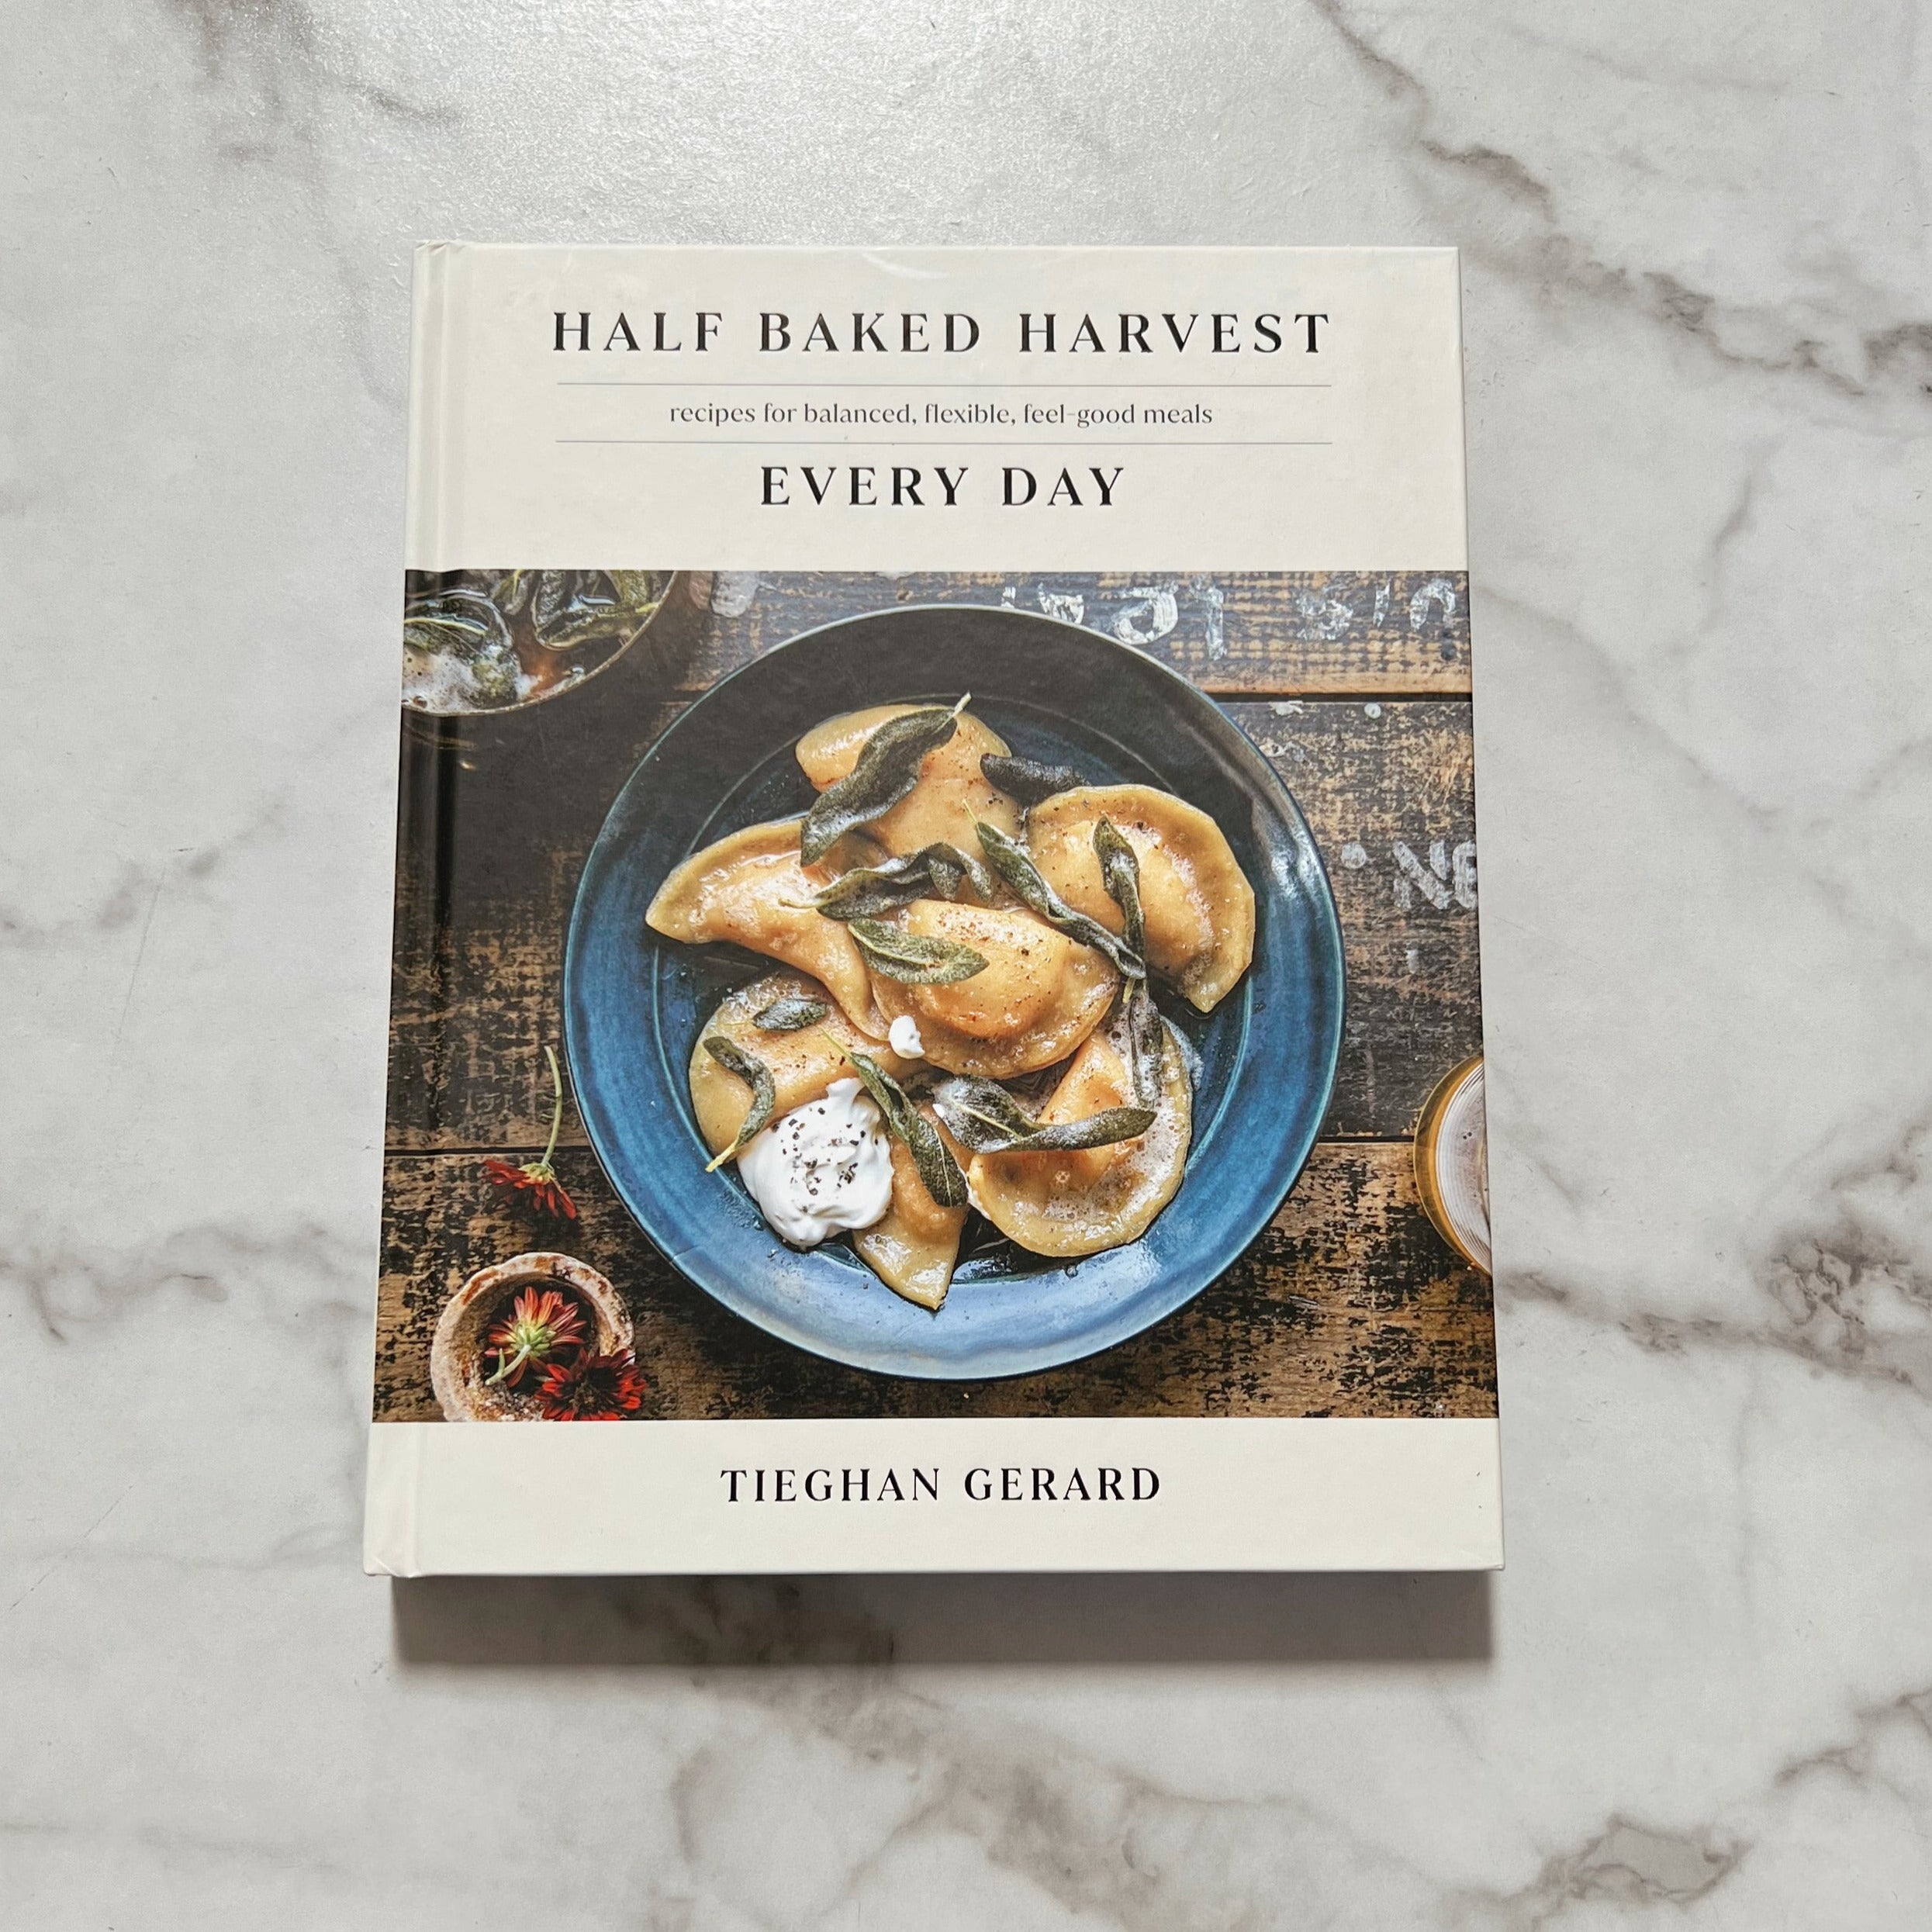 Half Baked Harvest cookbook featuring pierogis in a blue bowl on the cover.